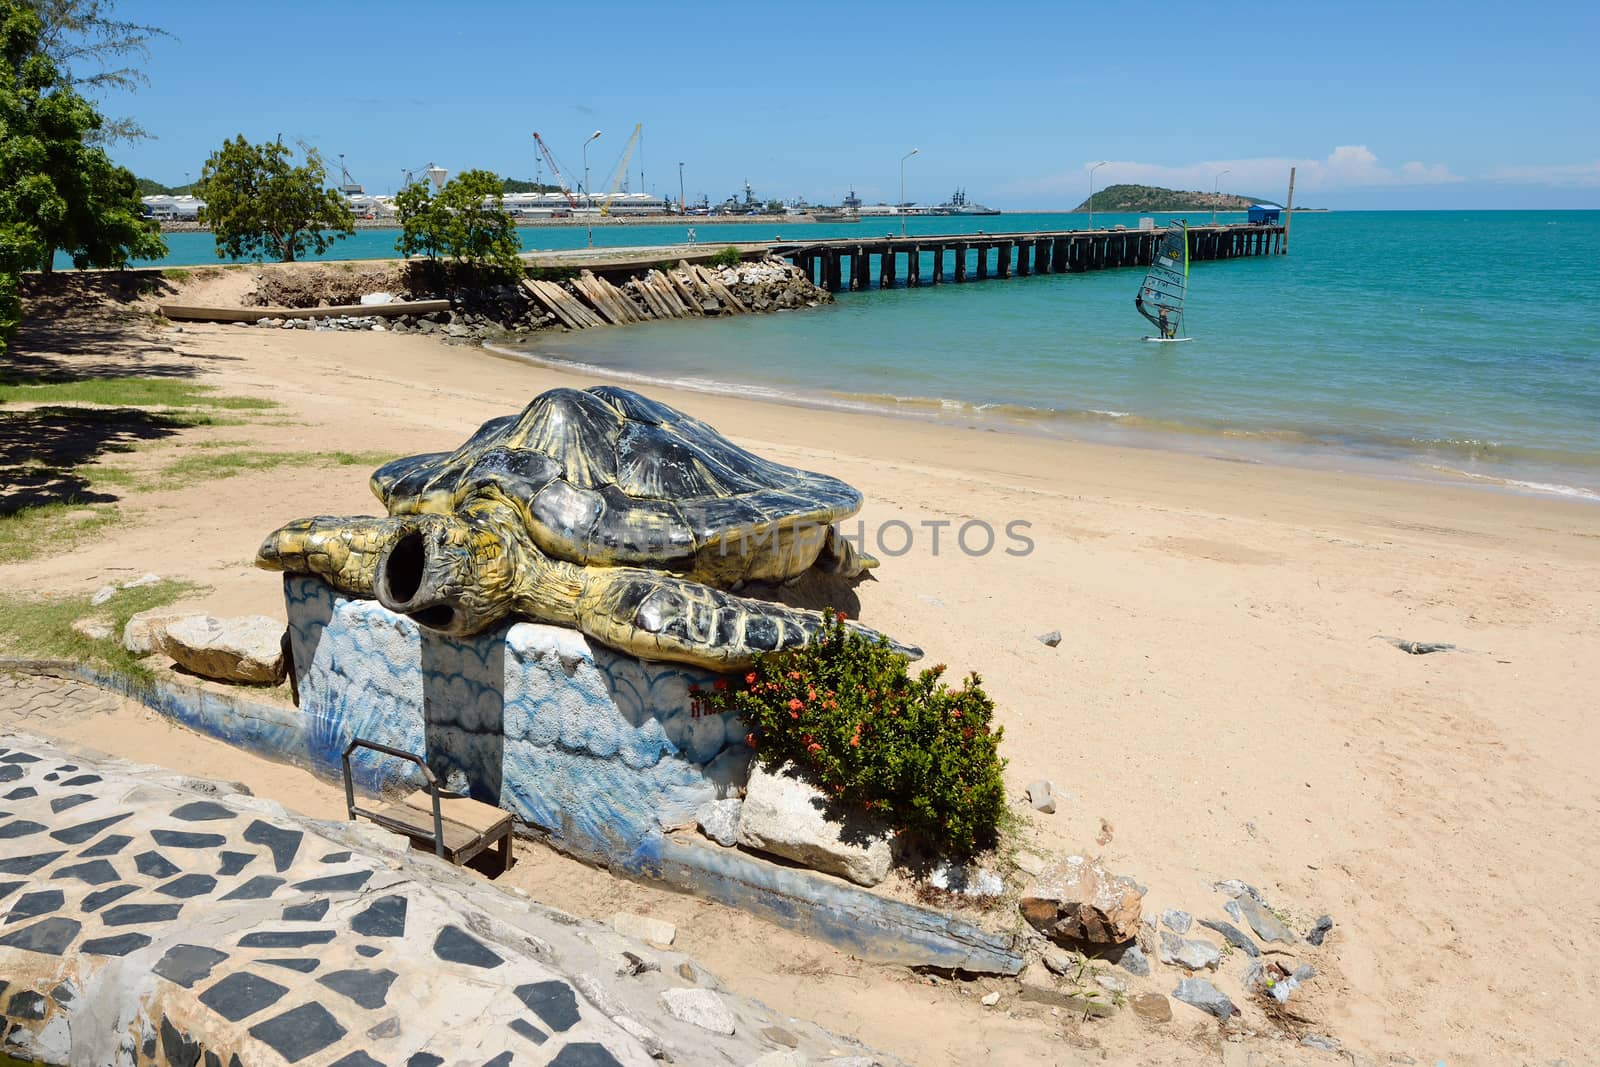 funny Turtle statue in Chonburi province, Thailand. by think4photop